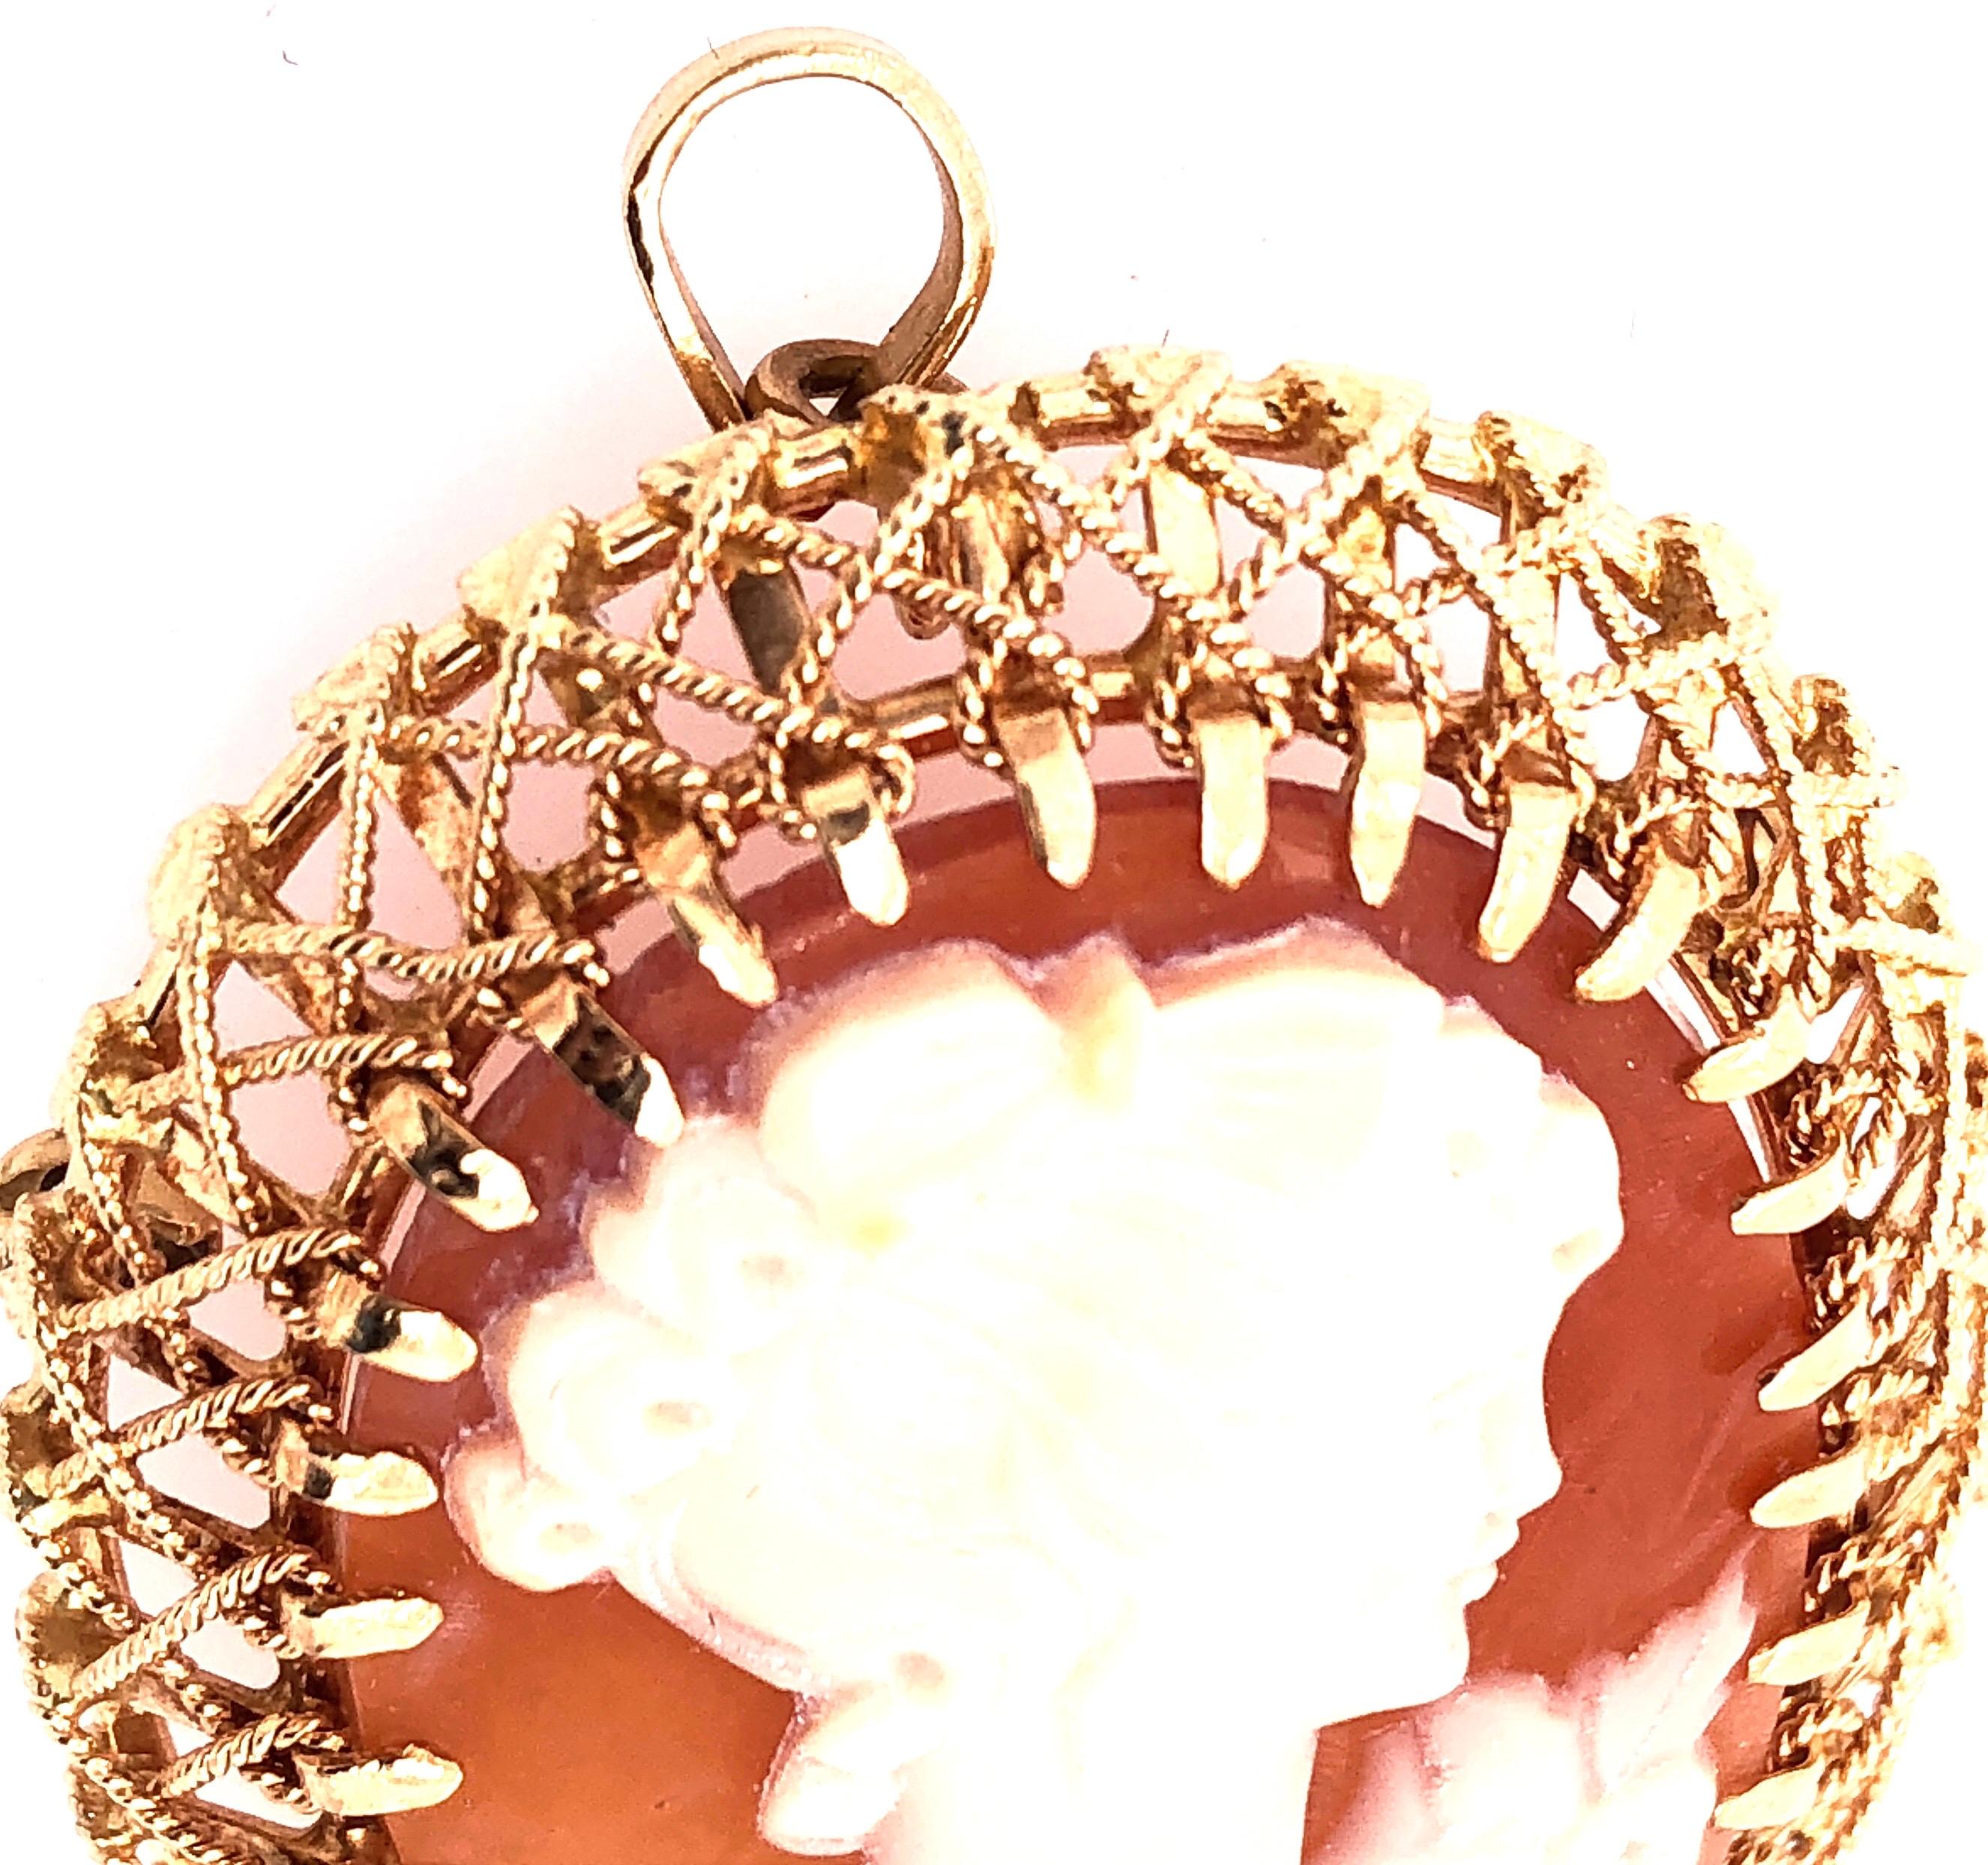 18 Karat Yellow Gold Filigree Design With Woman's Profile Cameo Pendant
10.6 grams total weight.
Height: 40 mm
Width: 30 mm